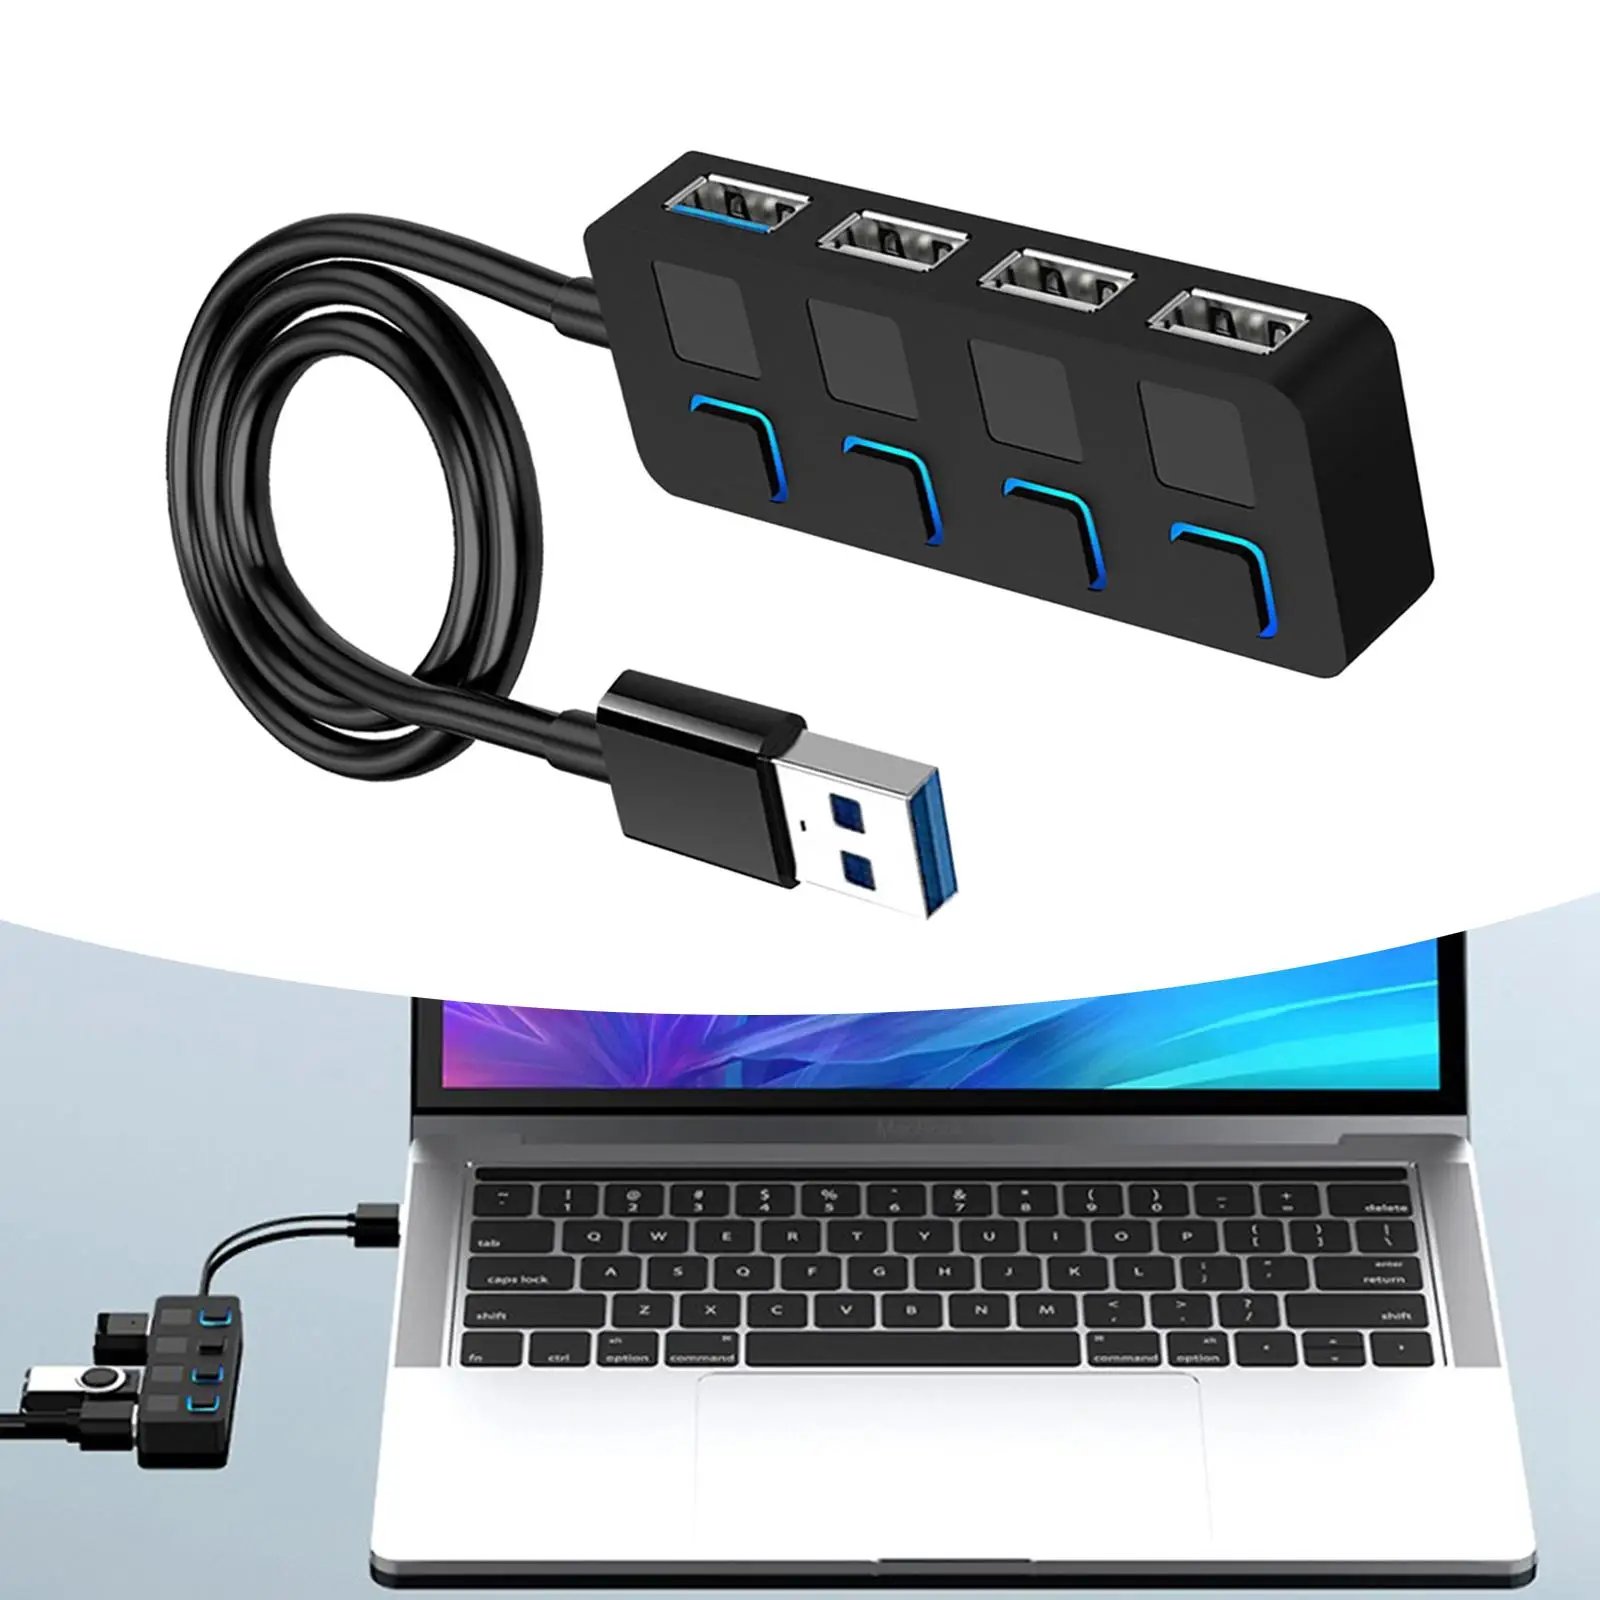 Slim 4 Port USB 3.0 Hub with Individual LED Power Switches Compact Data USB Hub for MacBook Mobile HDD for Mac Mini PC for iMac